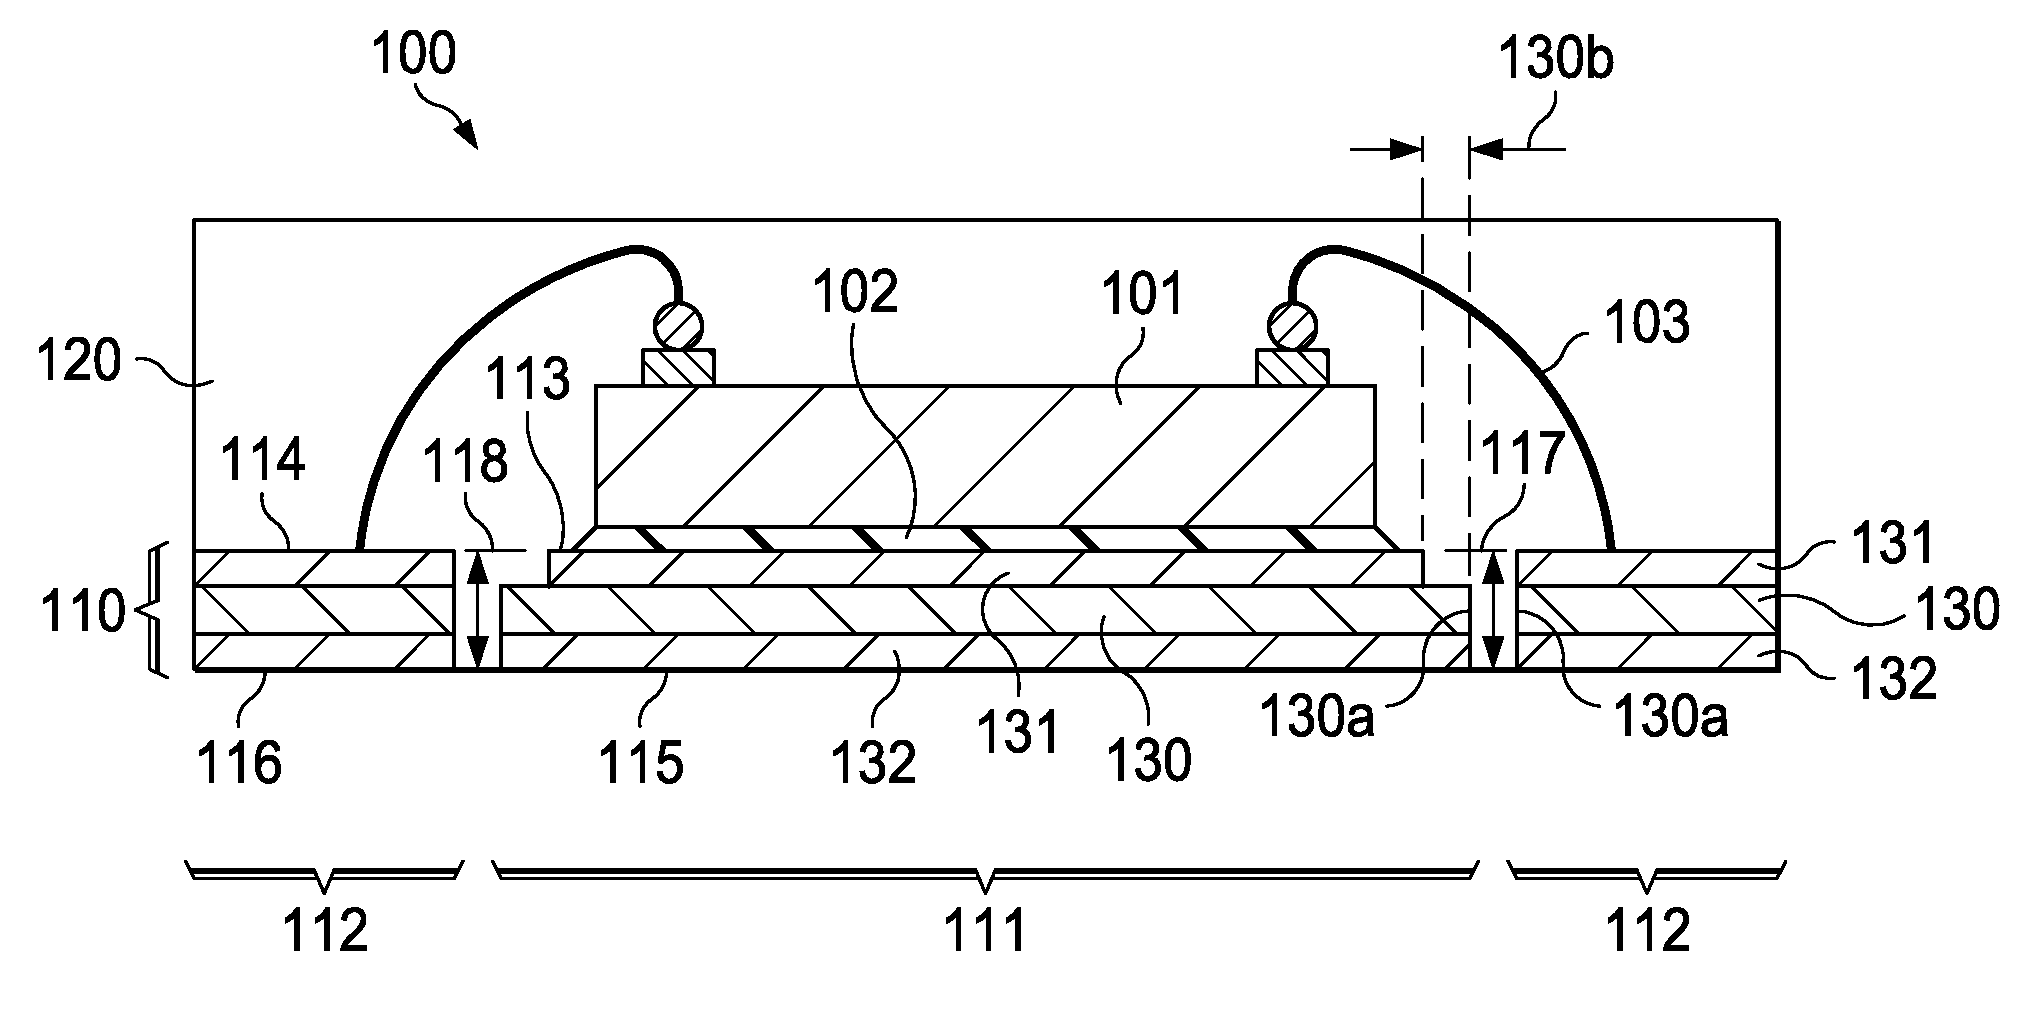 Method for Semiconductor Leadframes in Low Volume and Rapid Turnaround